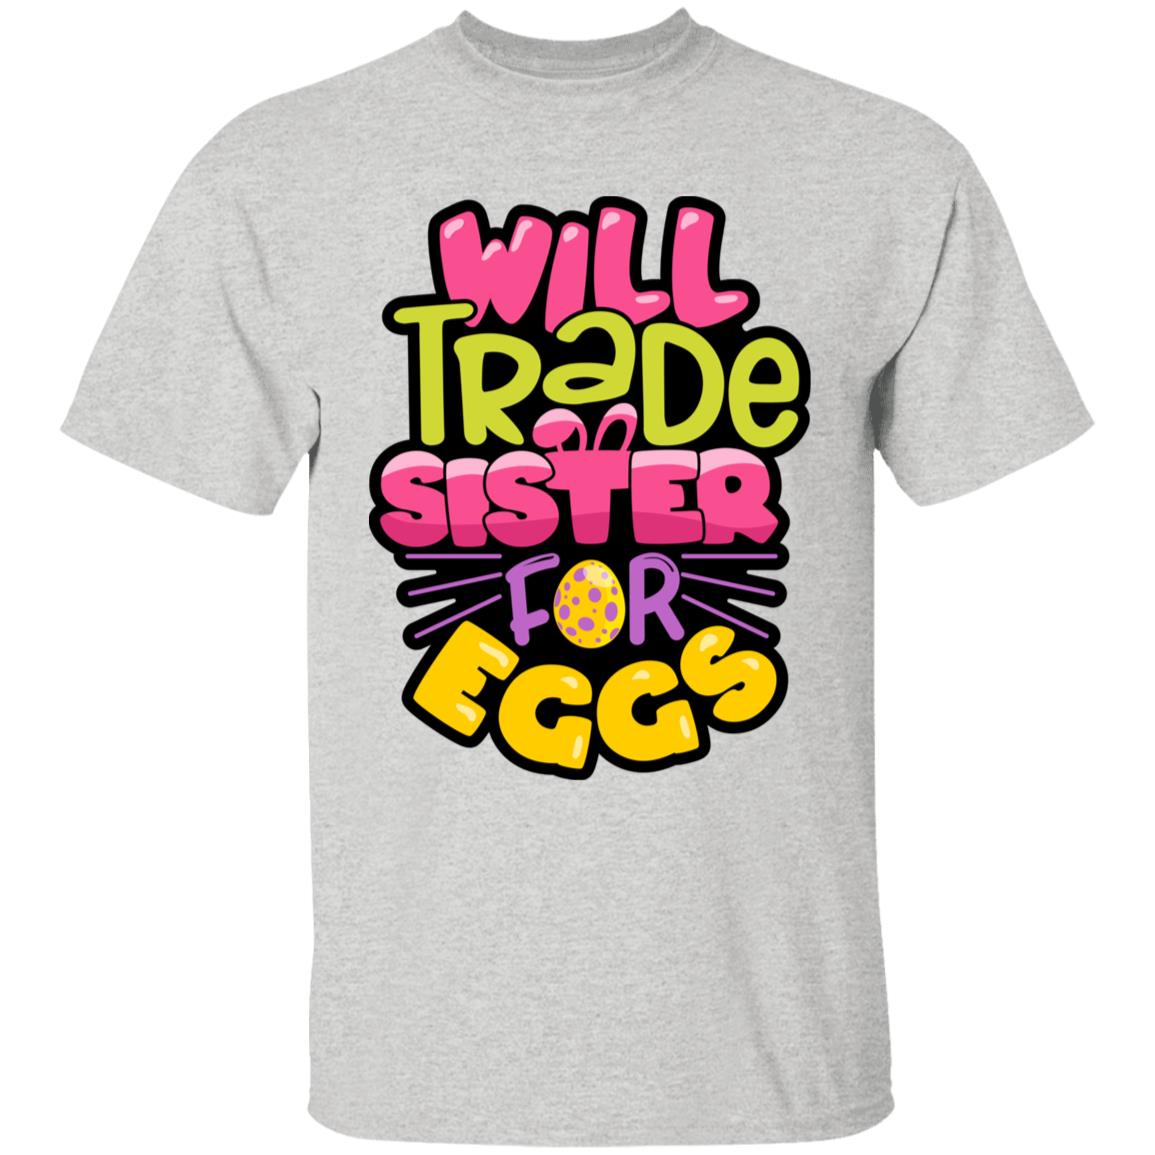 Will Trade Sister for Eggs Youth 5.3 oz 100% Cotton T-Shirt